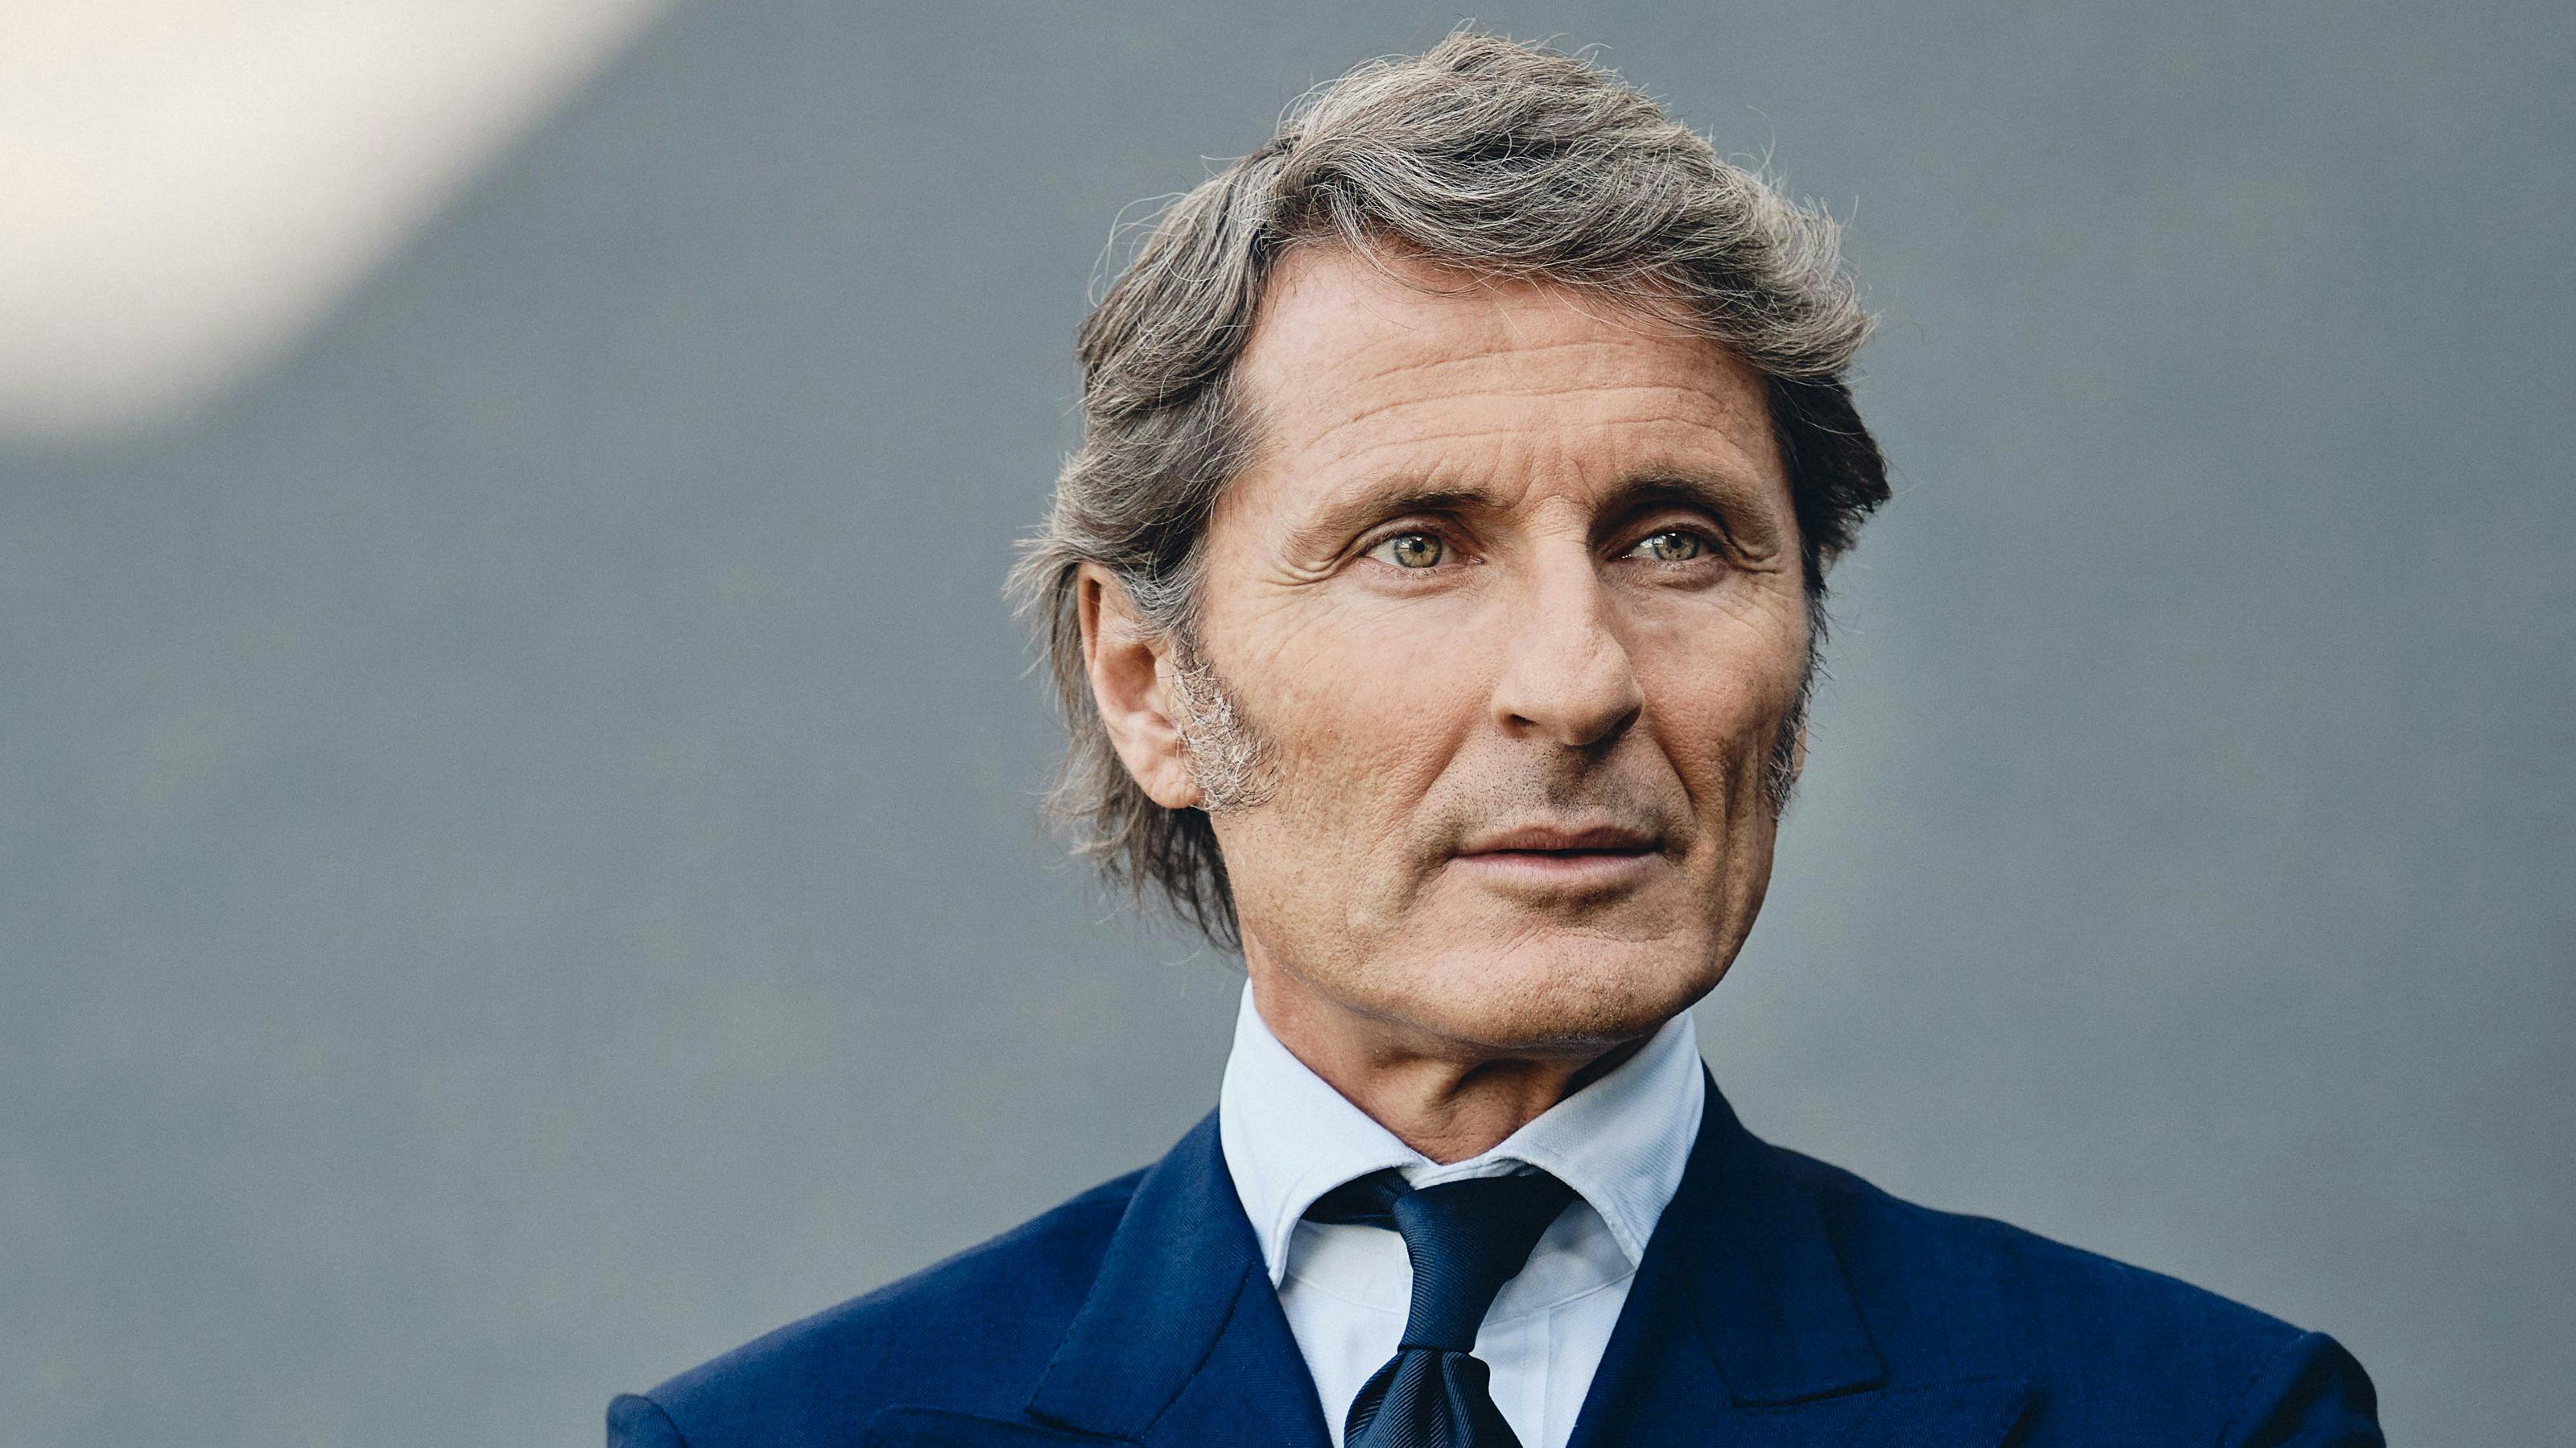 Stephan Winkelmann additionally becomes the new President and CEO of Automobili Lamborghini S.p.A.